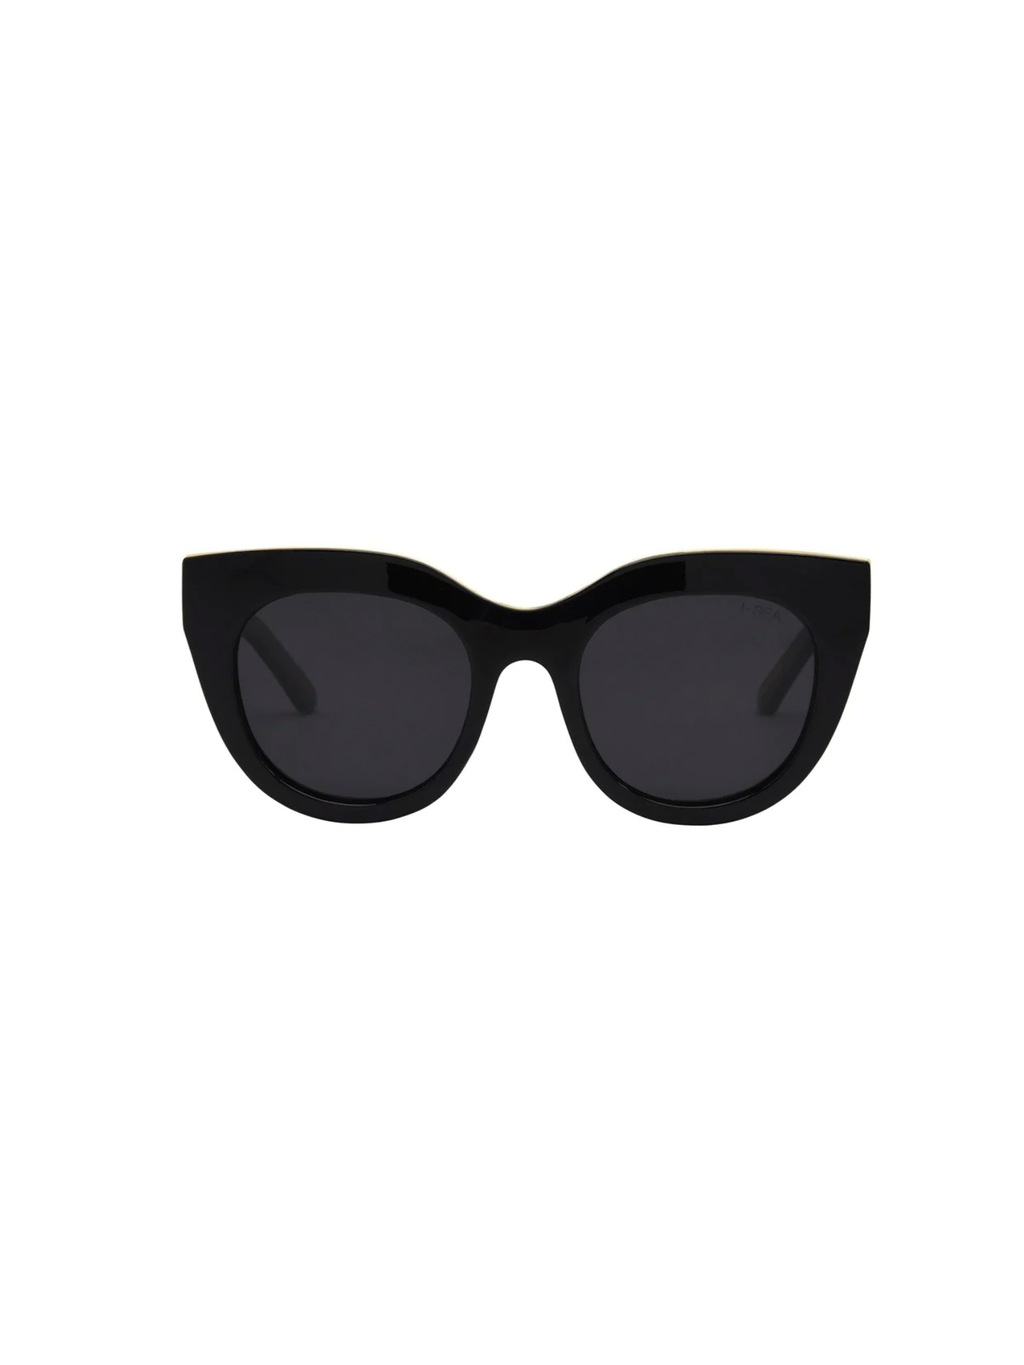 Lana Sunnies in Black/Smoke - Stitch And Feather